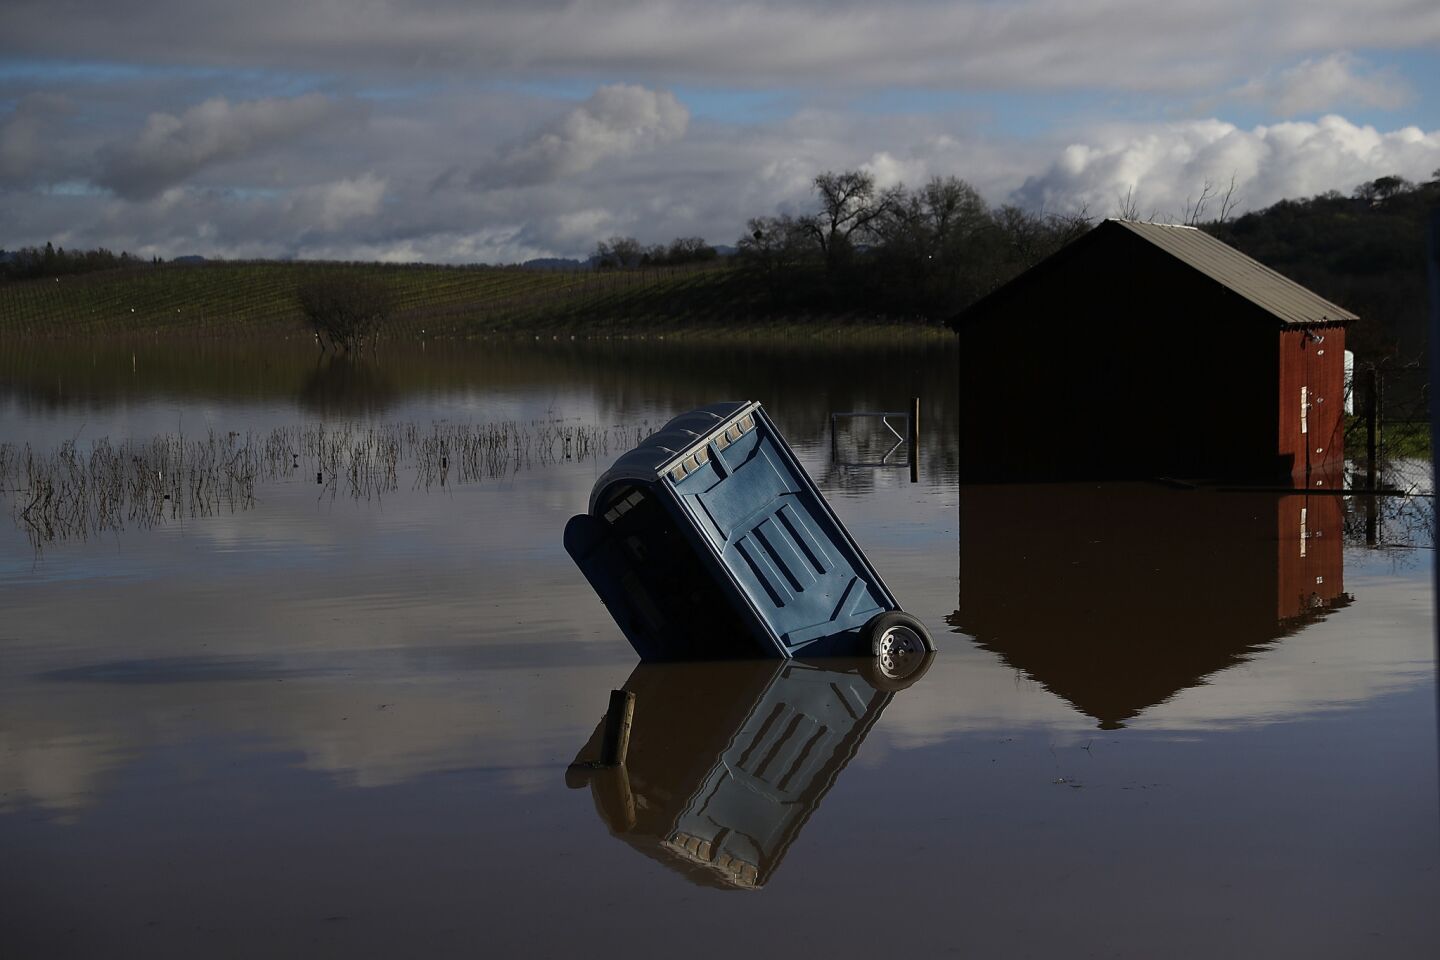 A portable toilet is submerged in floodwaters at a vineyard in Forestville.